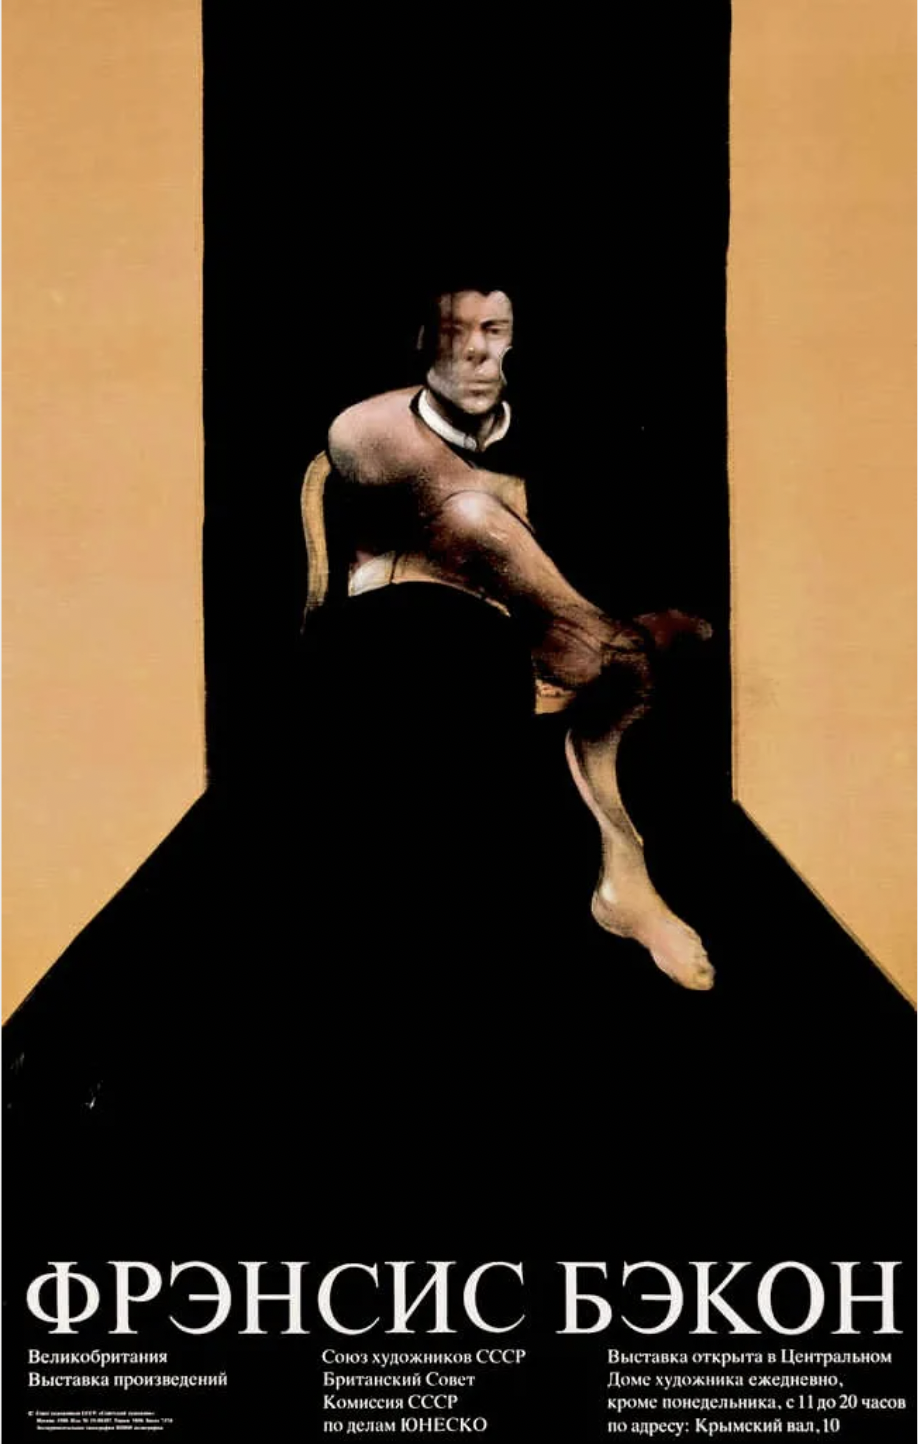 Francis Bacon Central Union of Artists, Moscow Exhibition Poster '88 (Eames Fine Art)..